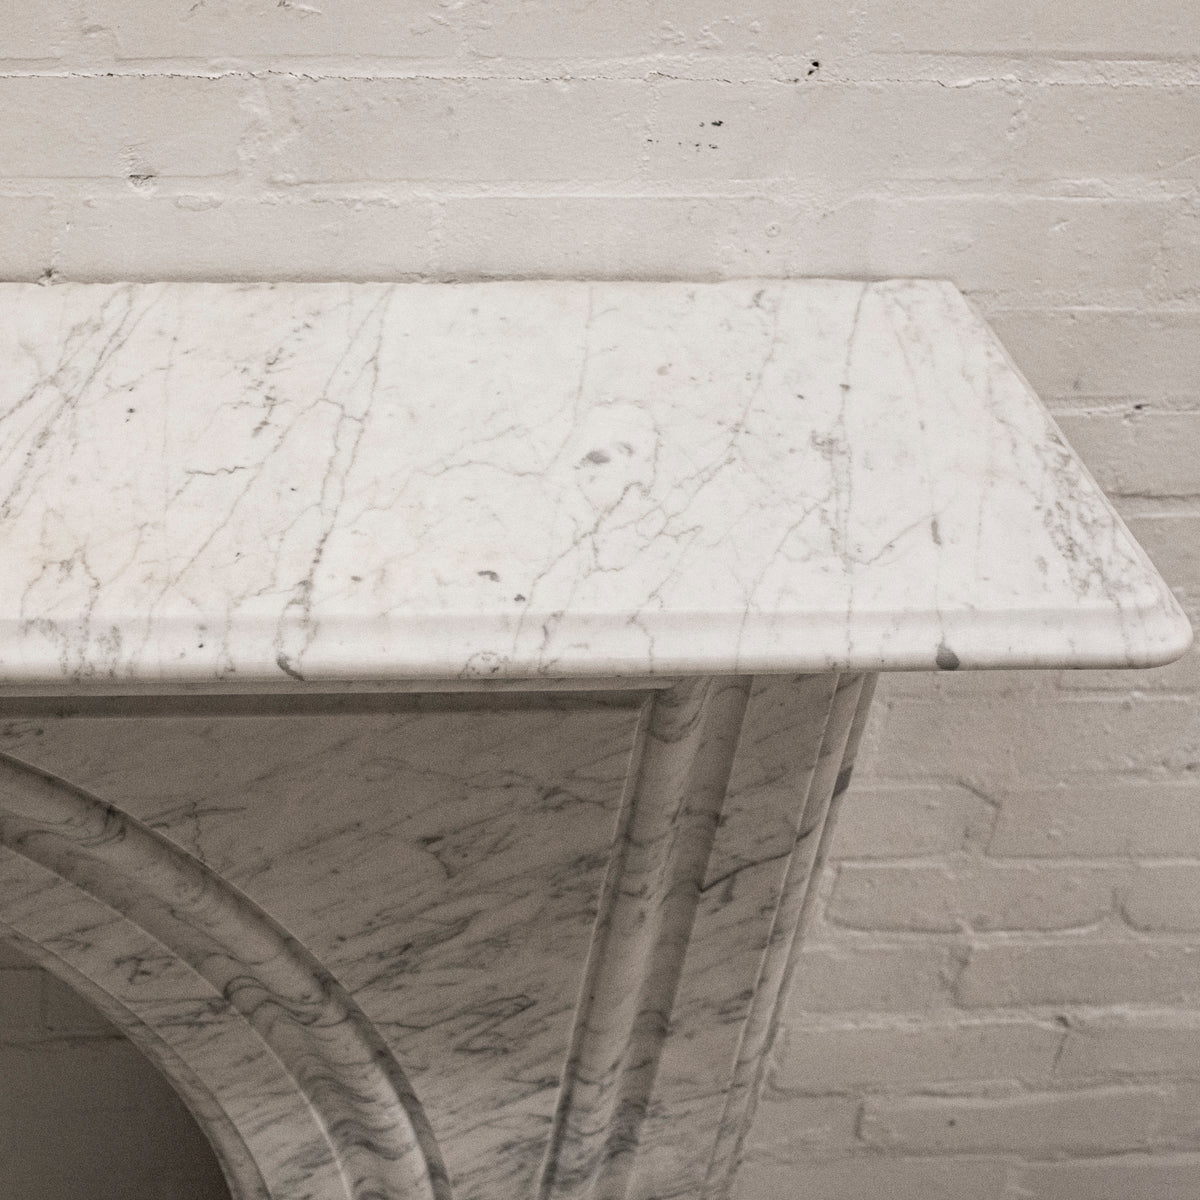 Large Antique Victorian Carrara Marble Arched Surround | The Architectural Forum